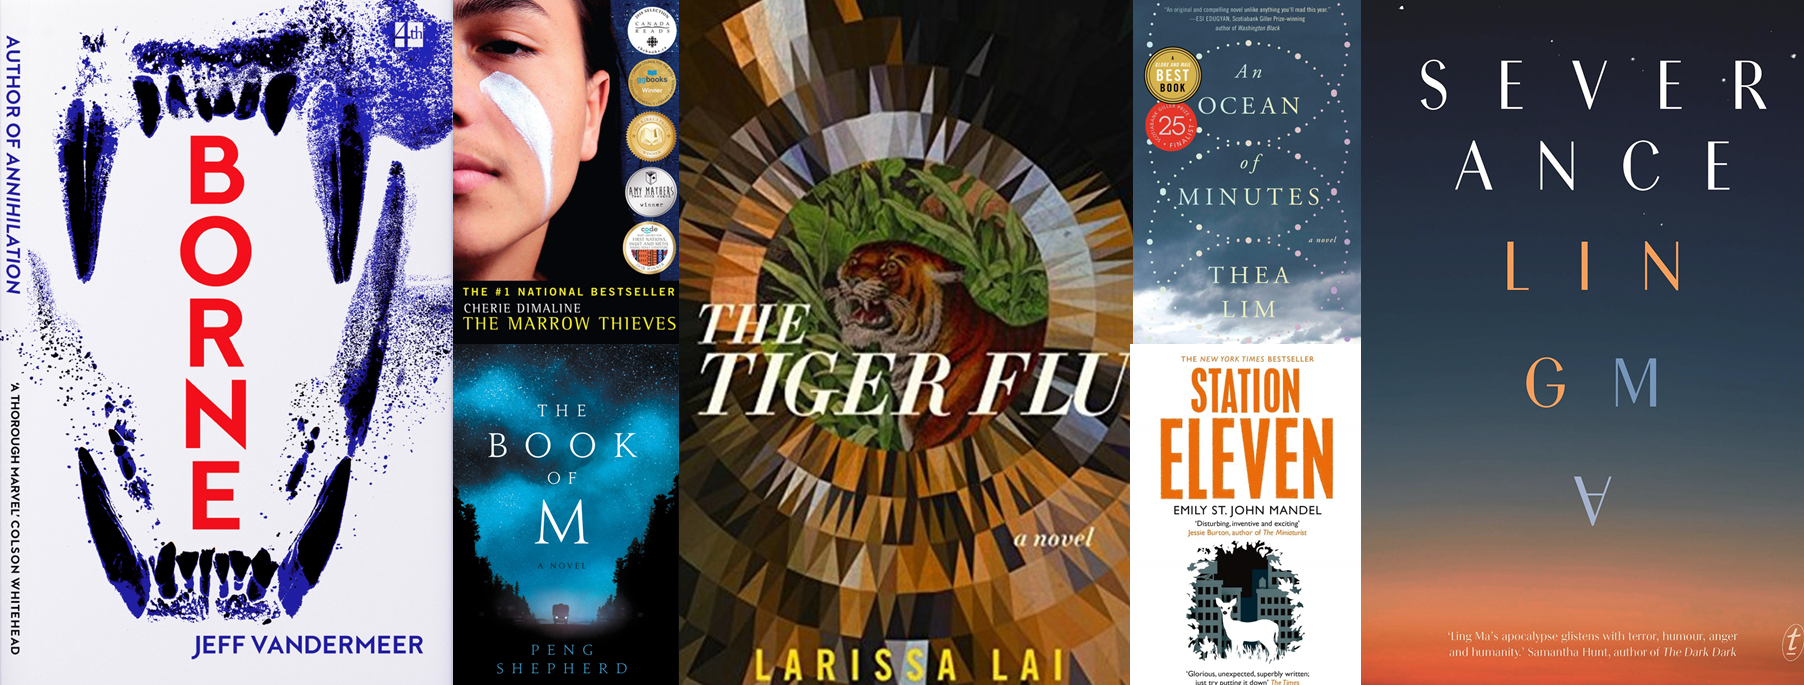 A collection of book covers showing Borne by Jeff Vandermeer, The Marrow Thieves by Cherie Dimaline, The Book of M by Peng Shepherd, The Tiger Flu by Larissa Lai, An Ocean of Minutes by The Lim, Station Eleven by Emil St. John Mandel, Severance by Ling Ma